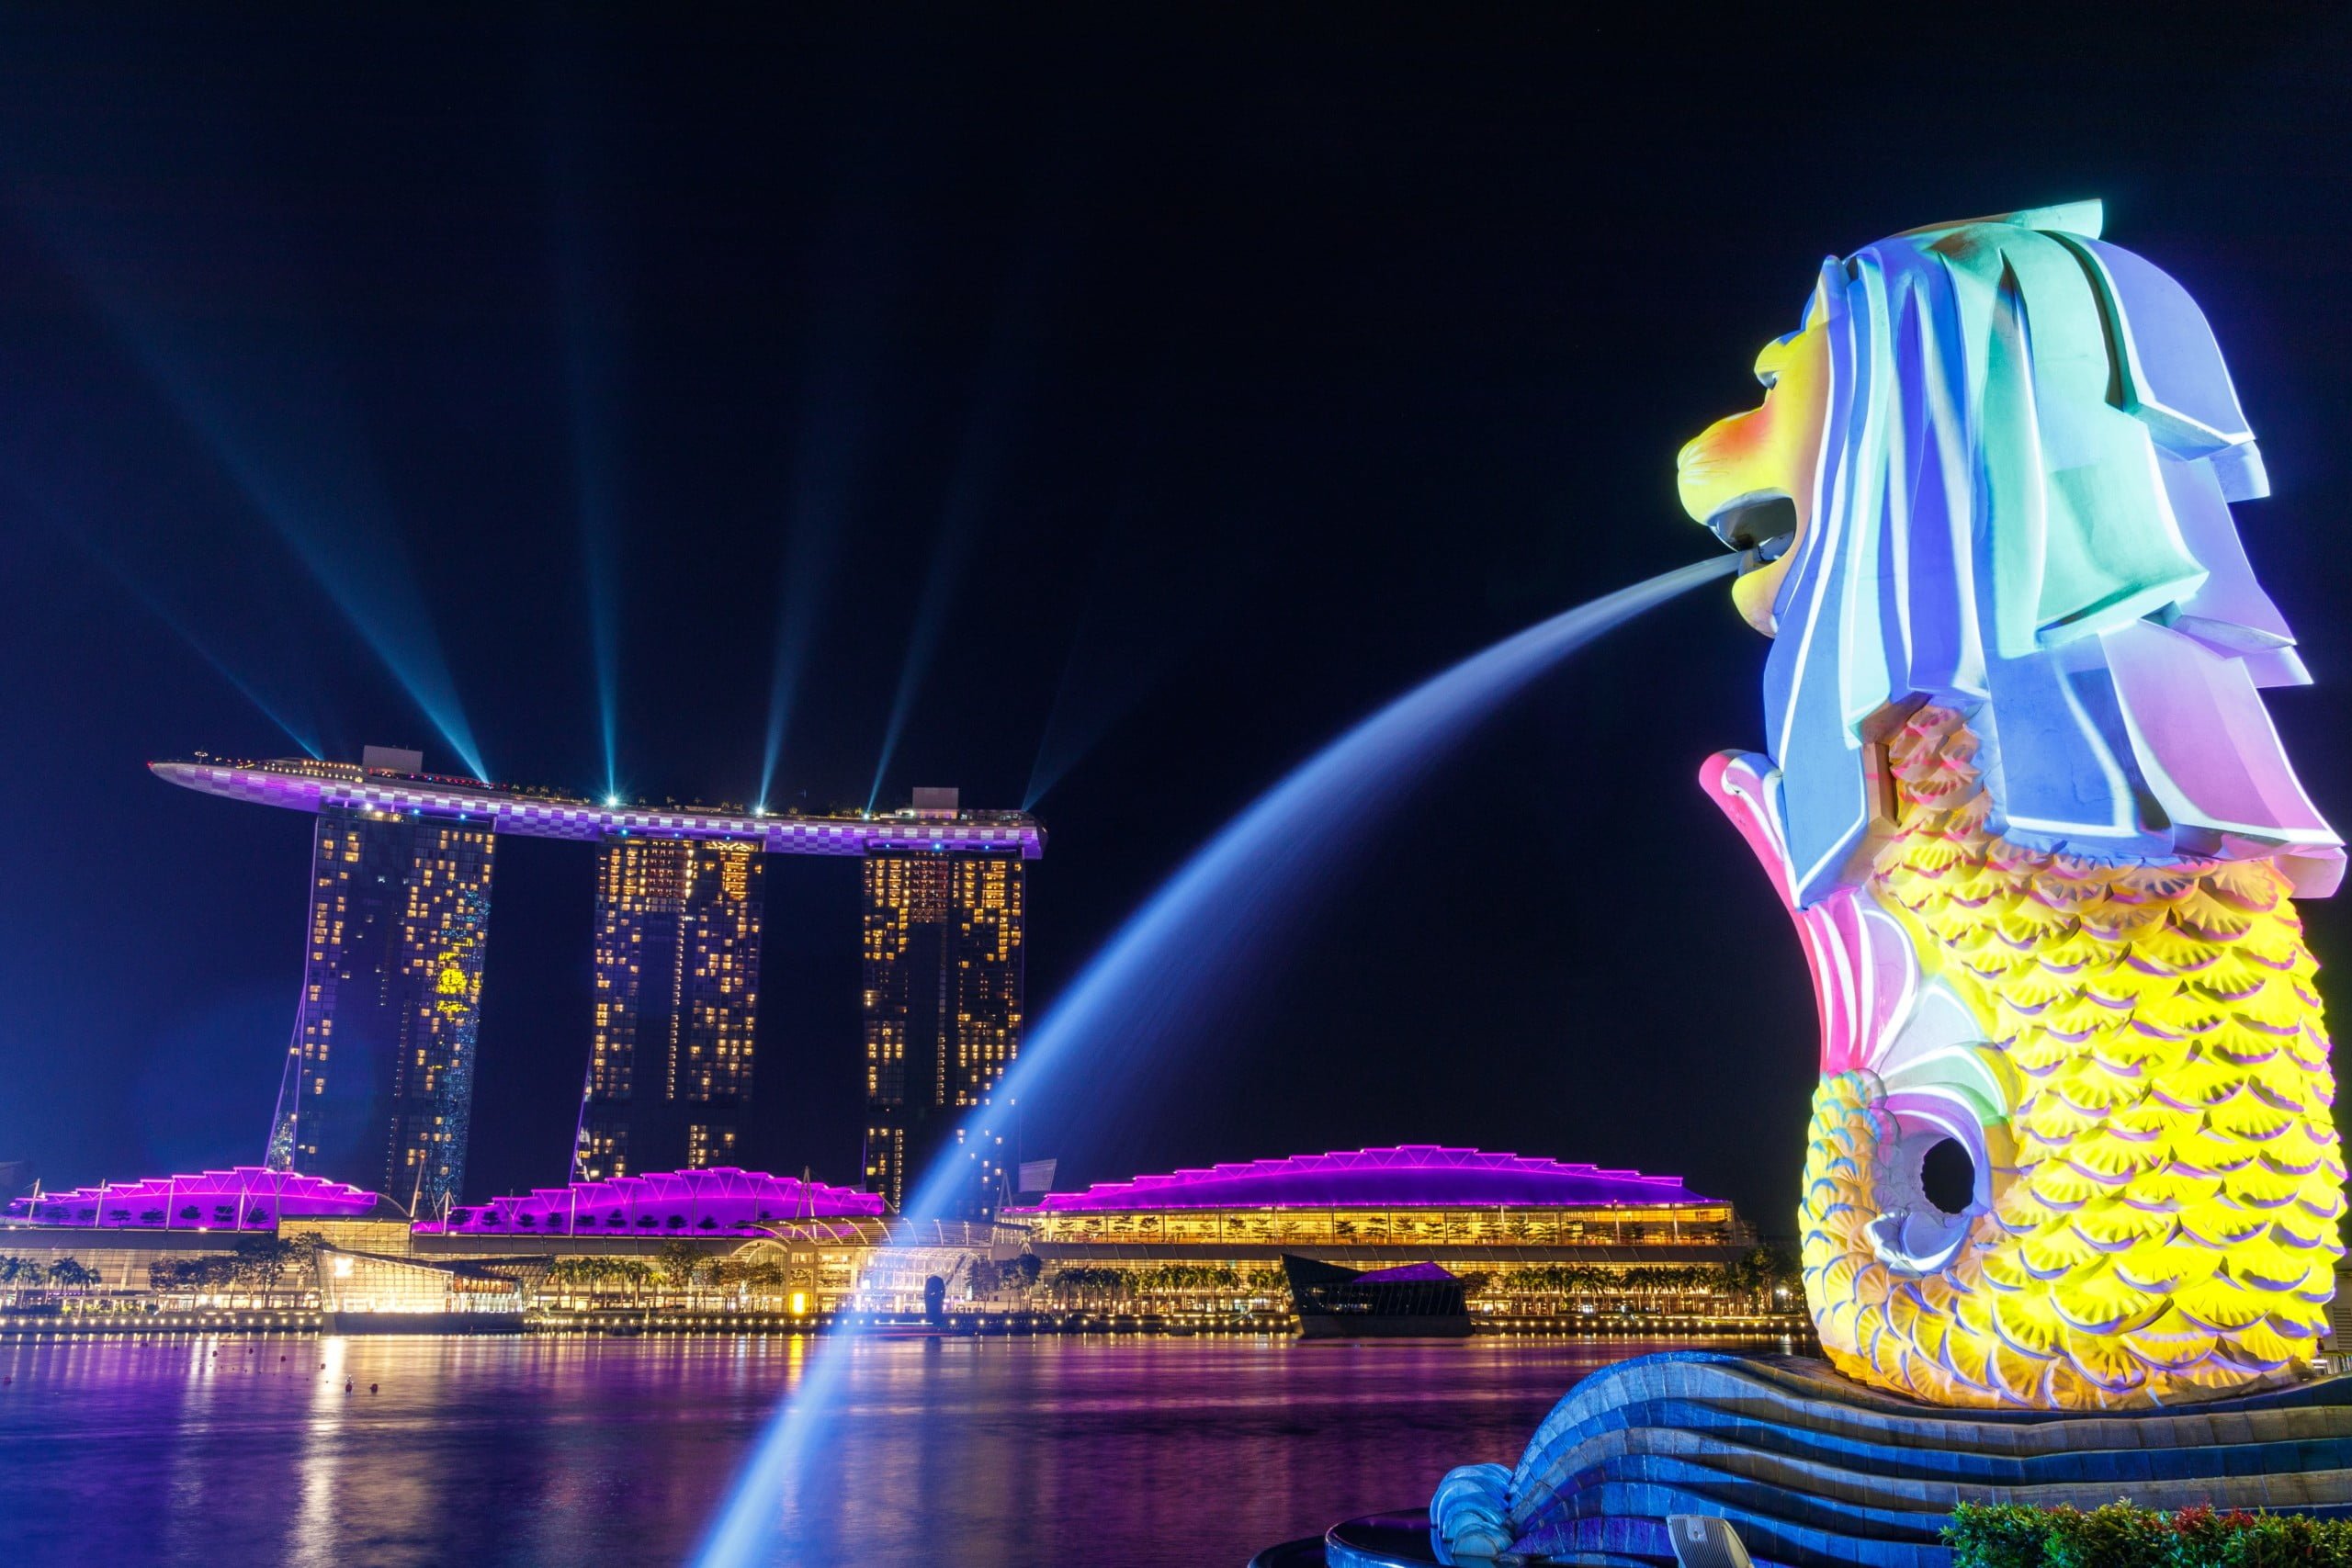 Lights shone on the Merlion as it overlooks Singapore's iconic Marina Bay Sands. During the Formula 1 Grand Prix night race, lights were projected onto the Merlion and the 'boat' of Marina Bay Sands.